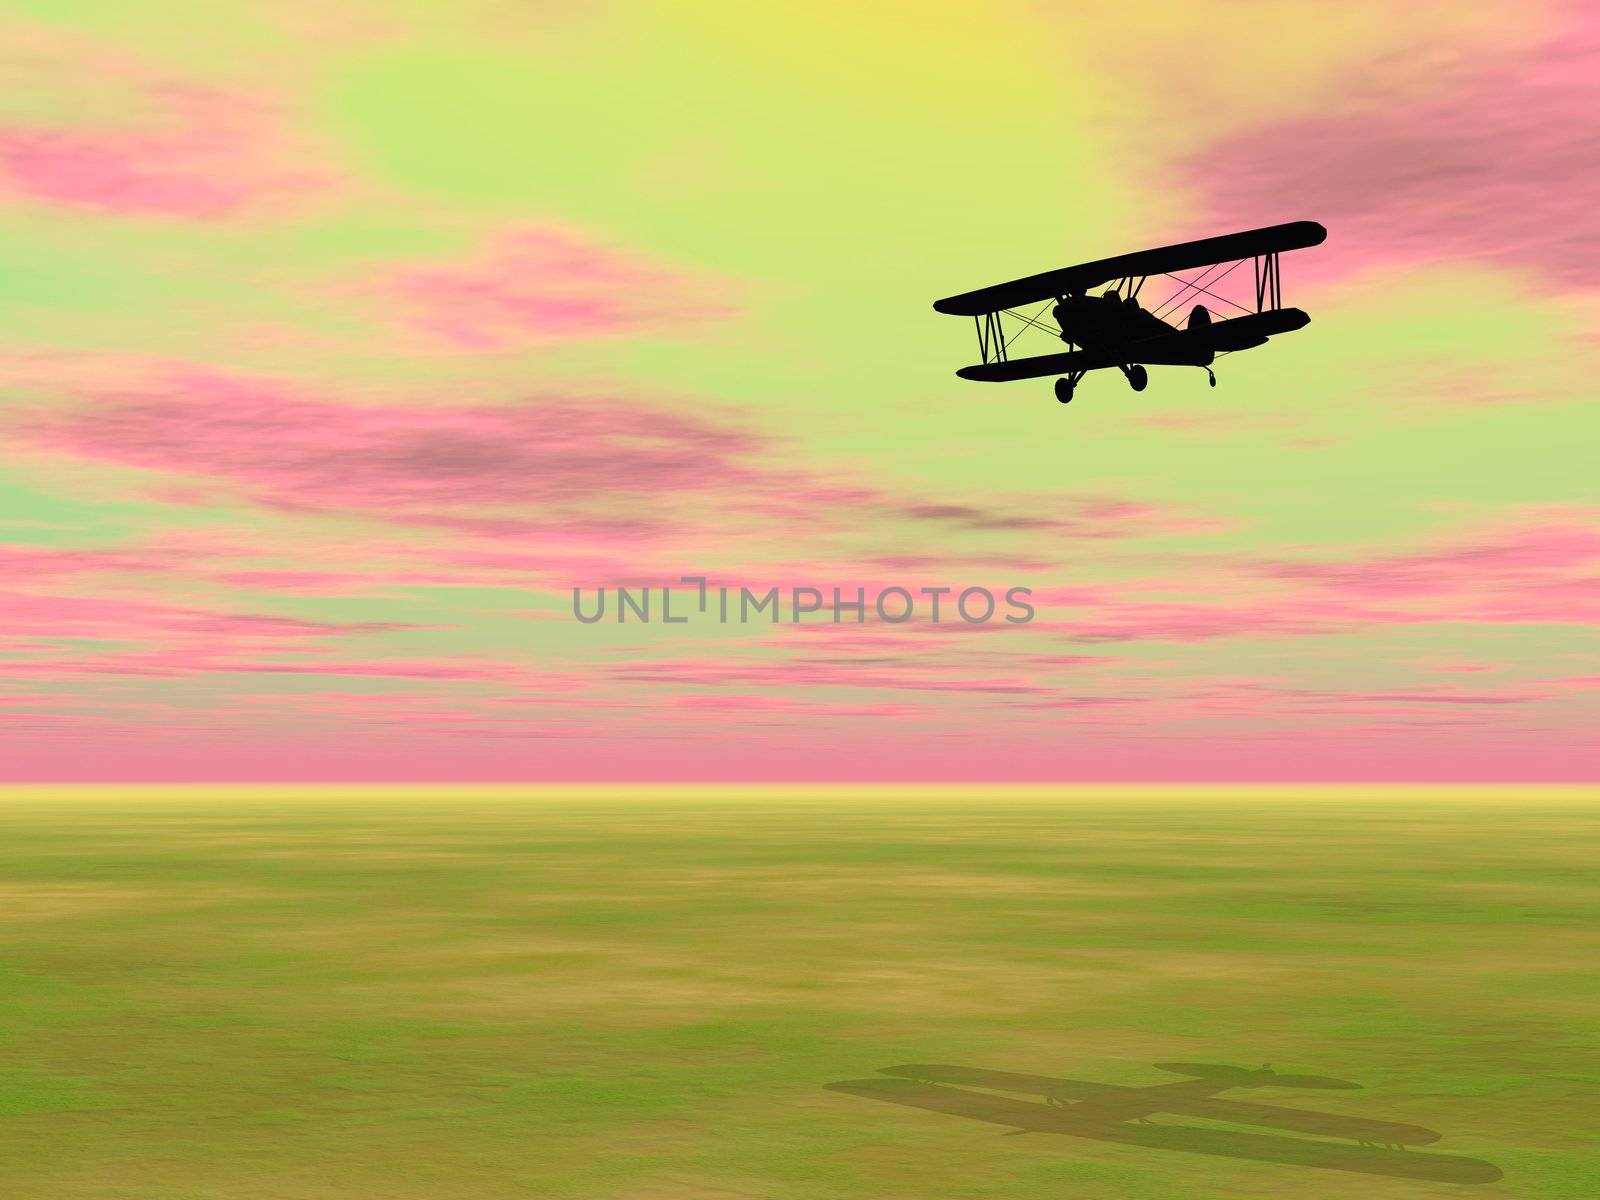 Shadow of a small biplan flying in colorful sky upon grassland